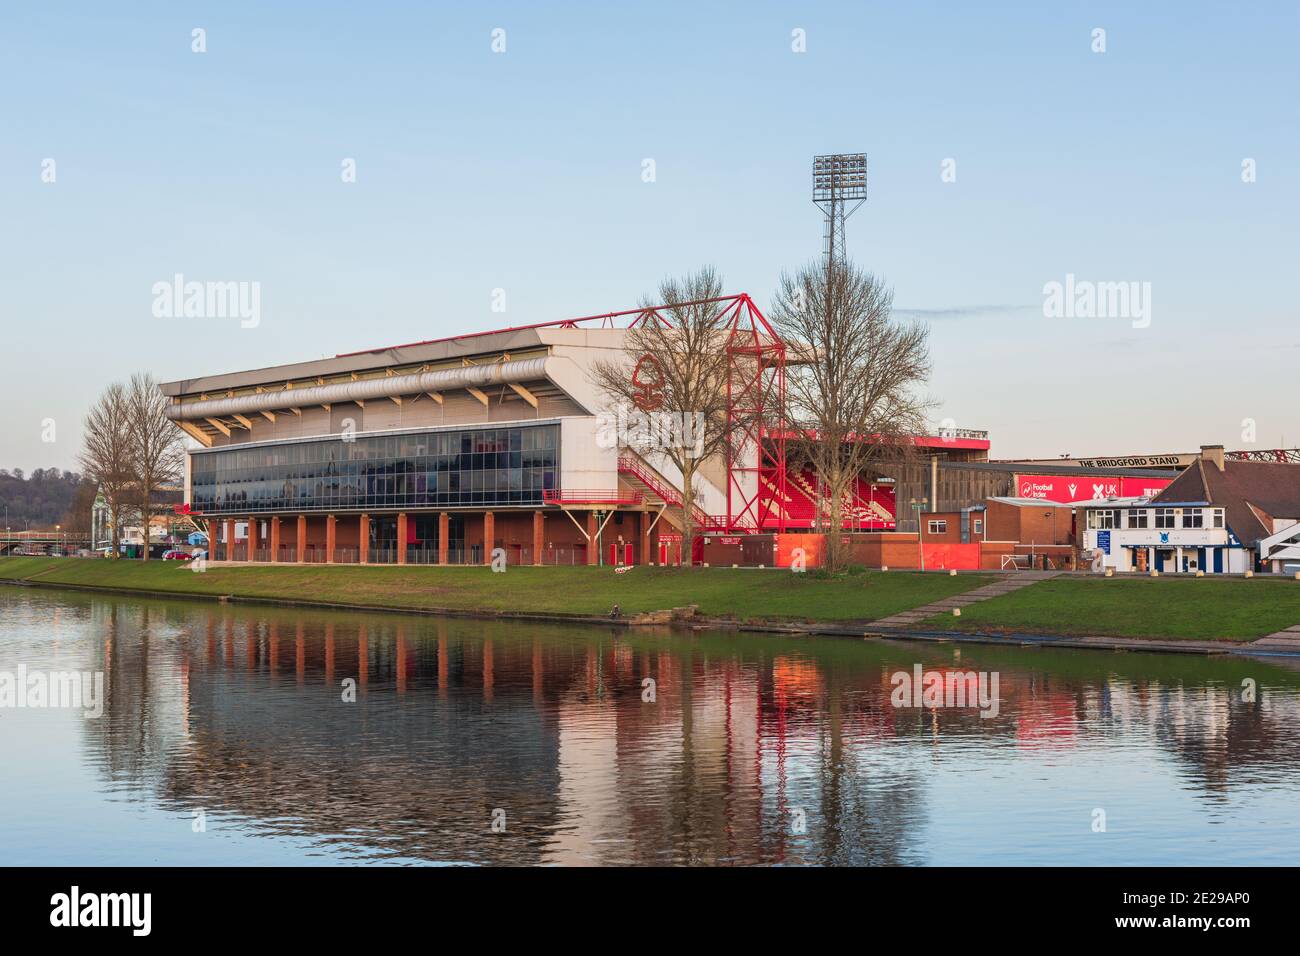 The famous Trent Bridge over the river with the Nottingham Forest City Ground in the background at West Bridgford in Nottingham, United Kingdom. Stock Photo